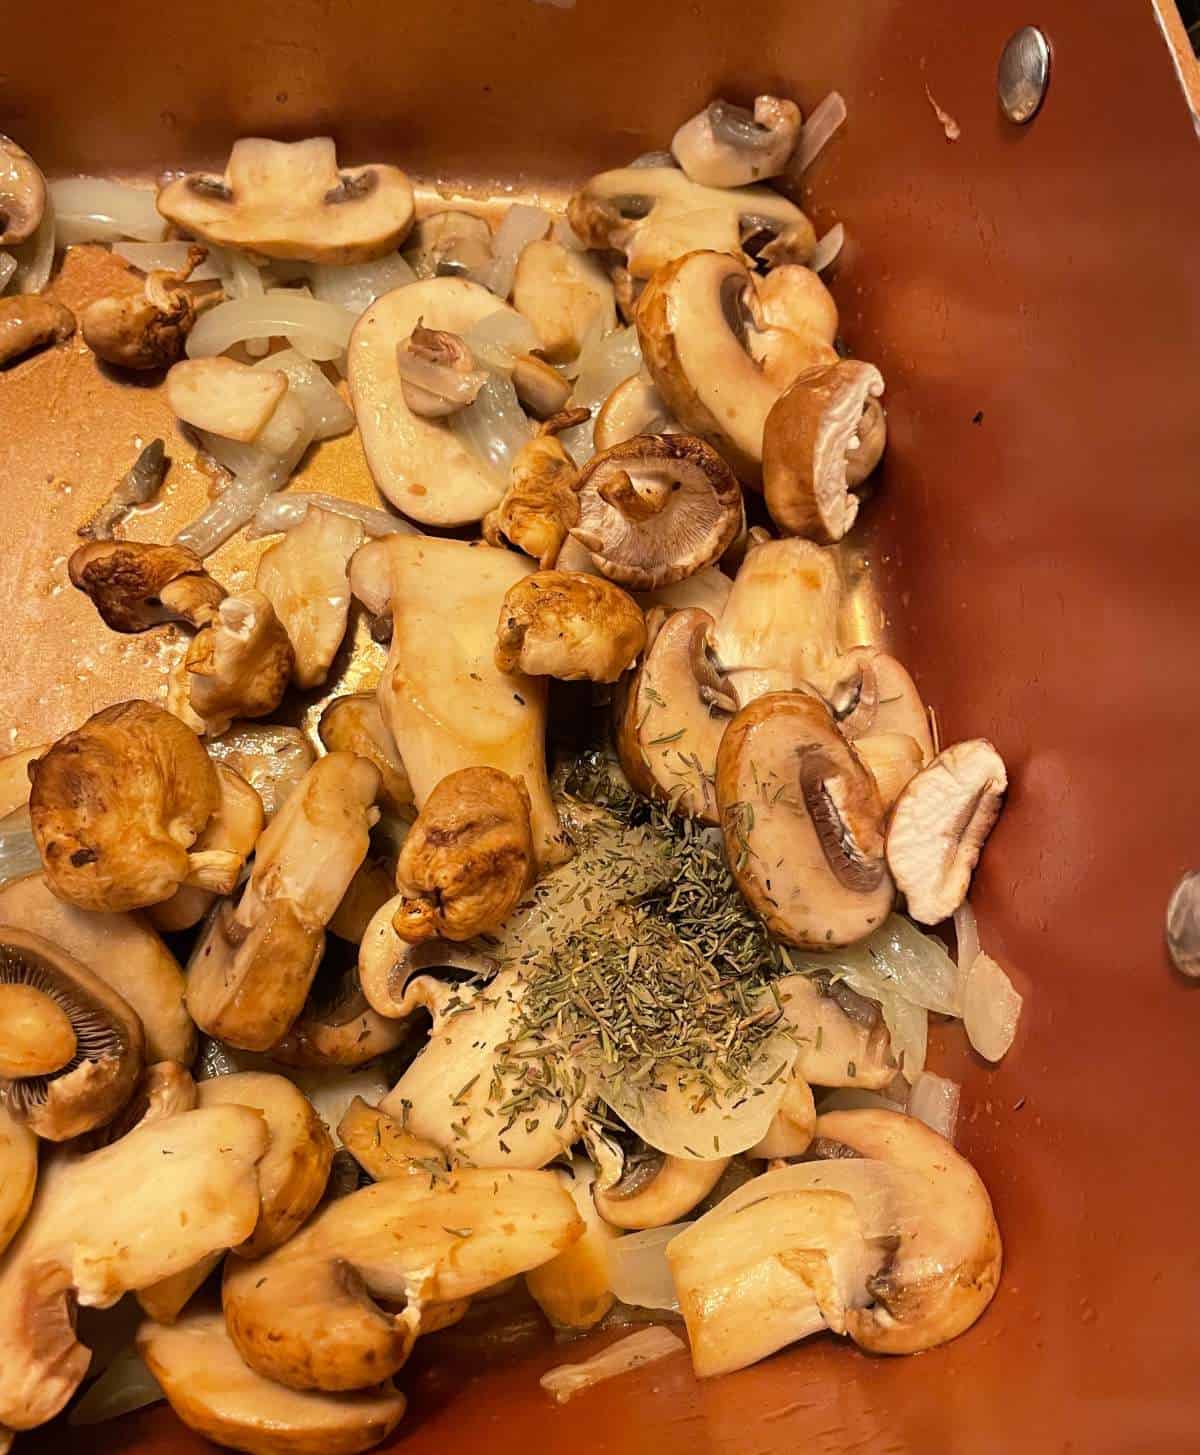 sautéing mushrooms in a pan to serve over salmon.